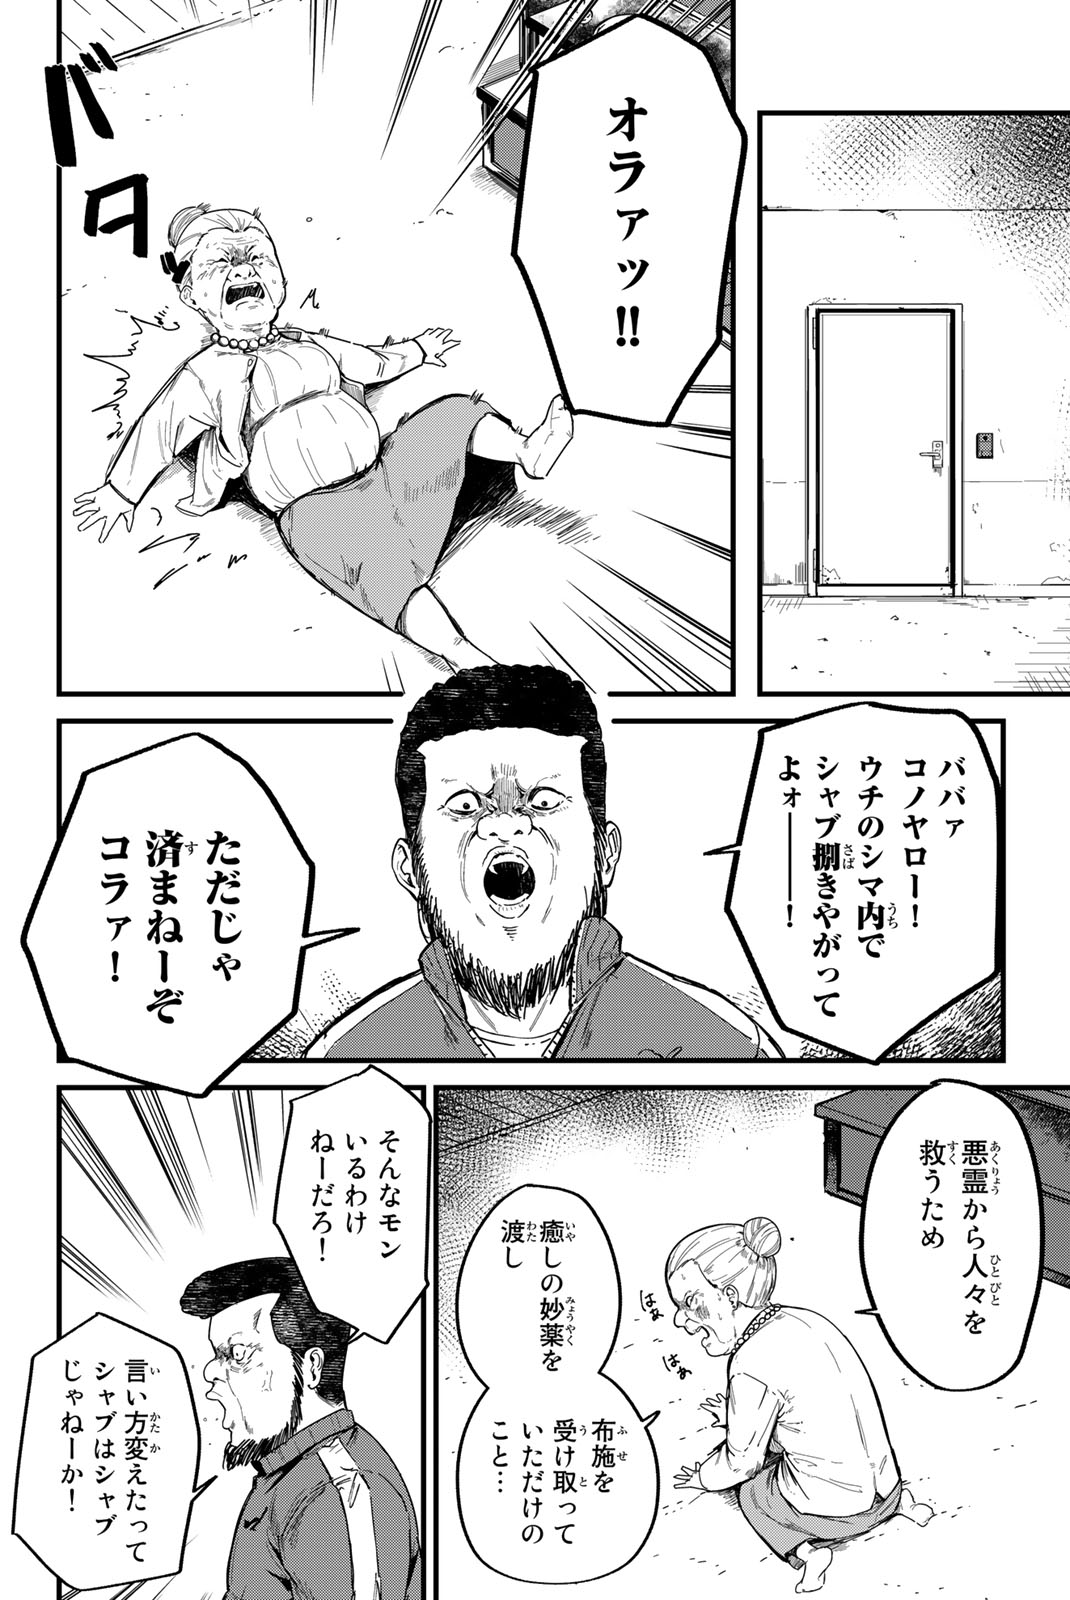 REDRUM 第1.1話 - Page 2